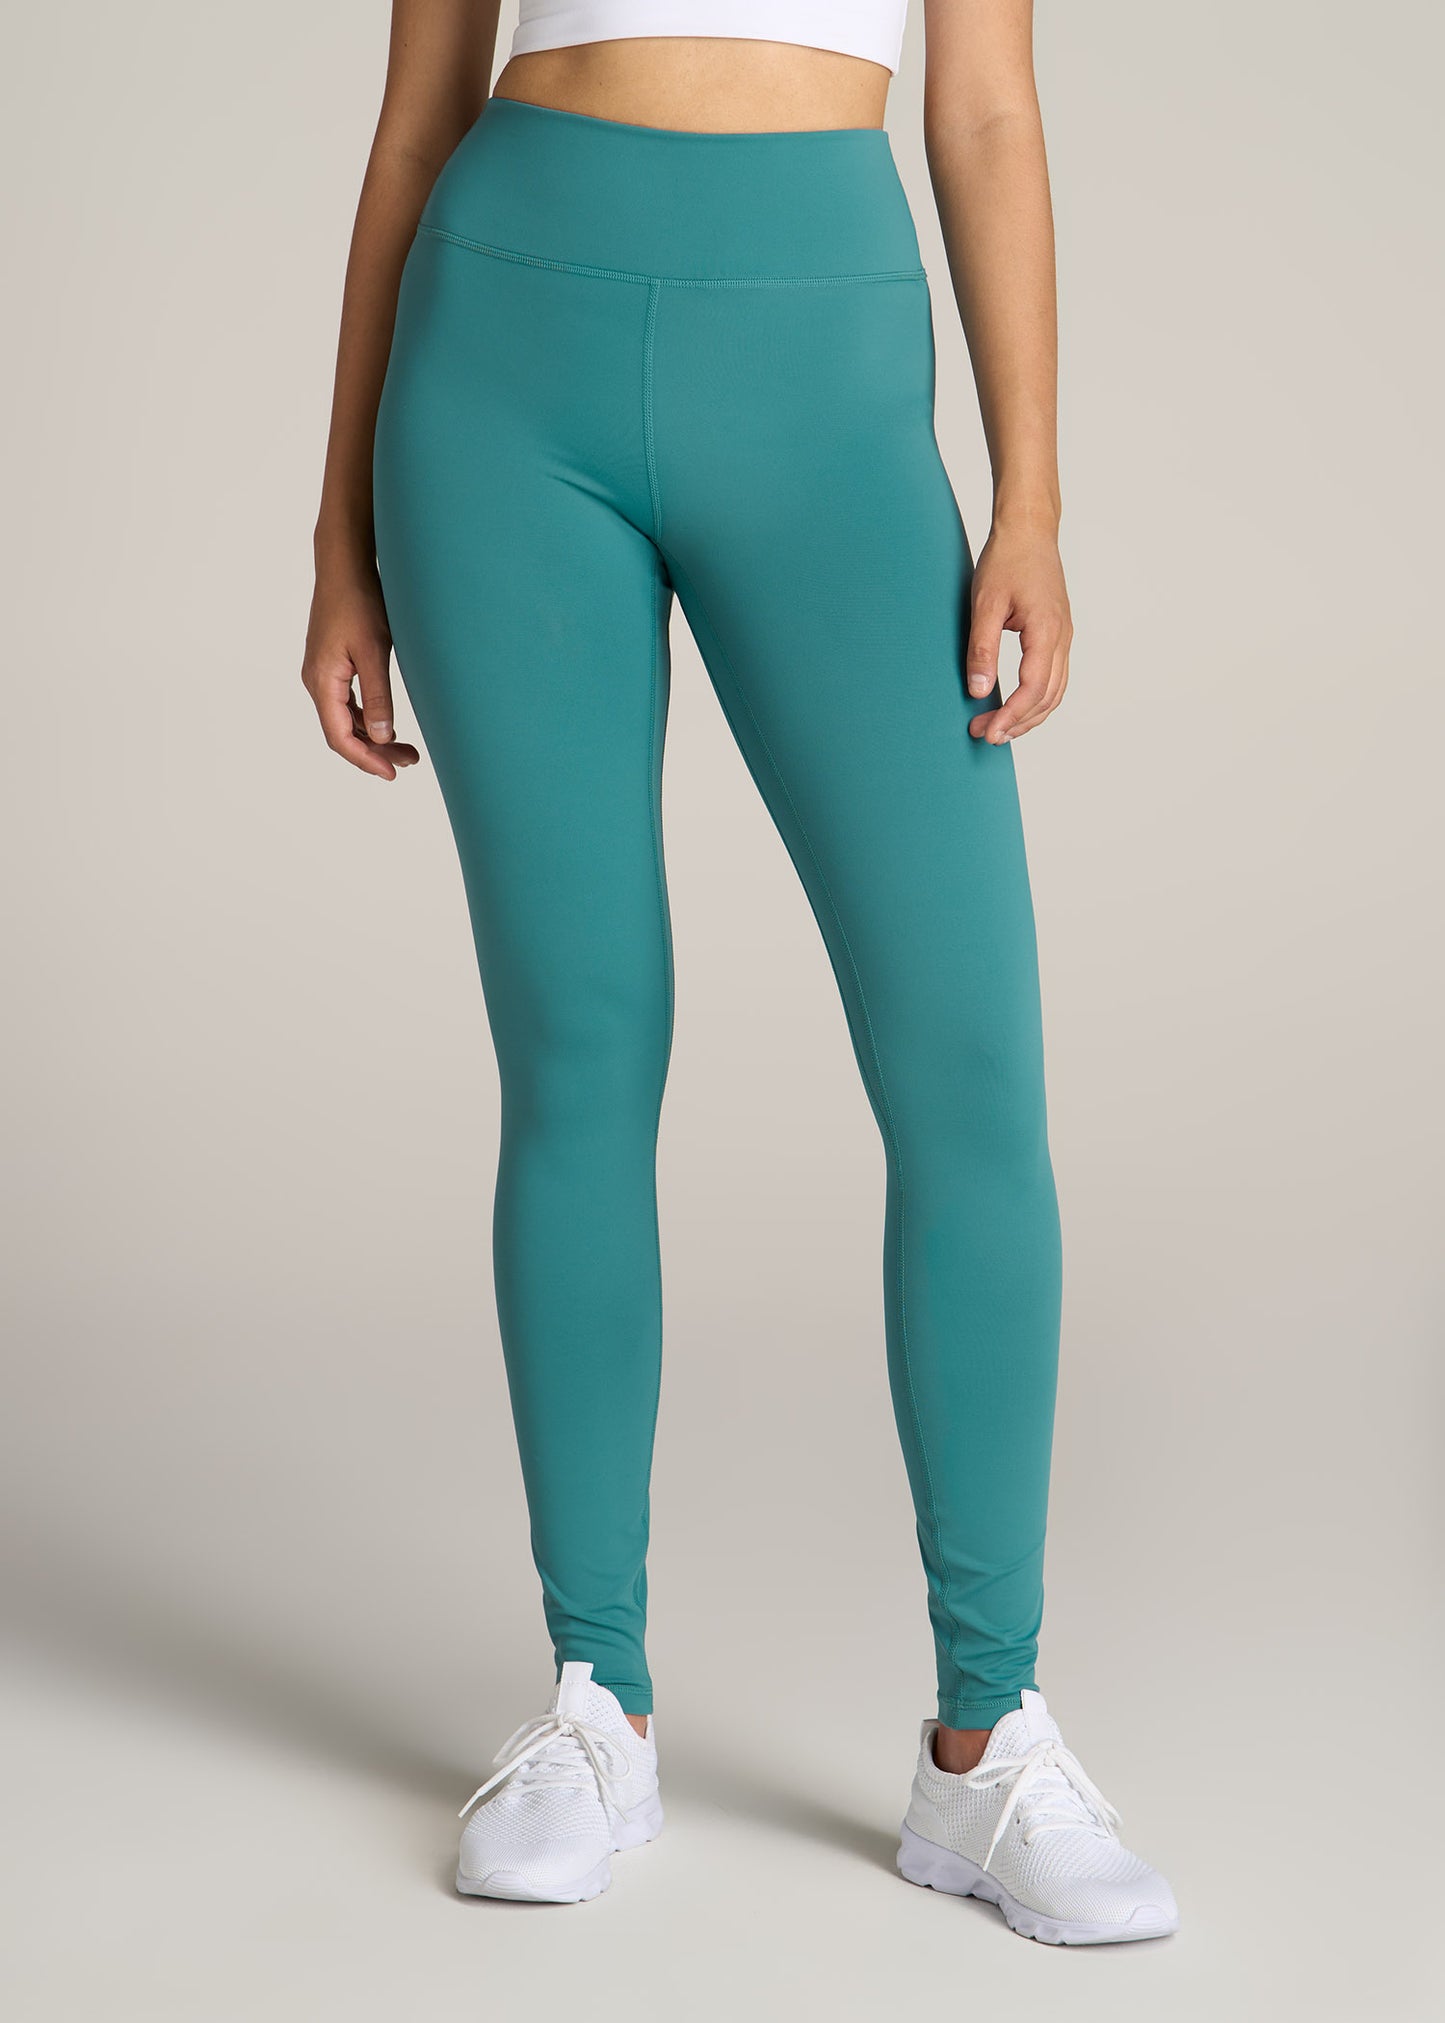 Women's High-Rise Leggings with Zipper Pockets - All in Motion Turquoise,  Size M